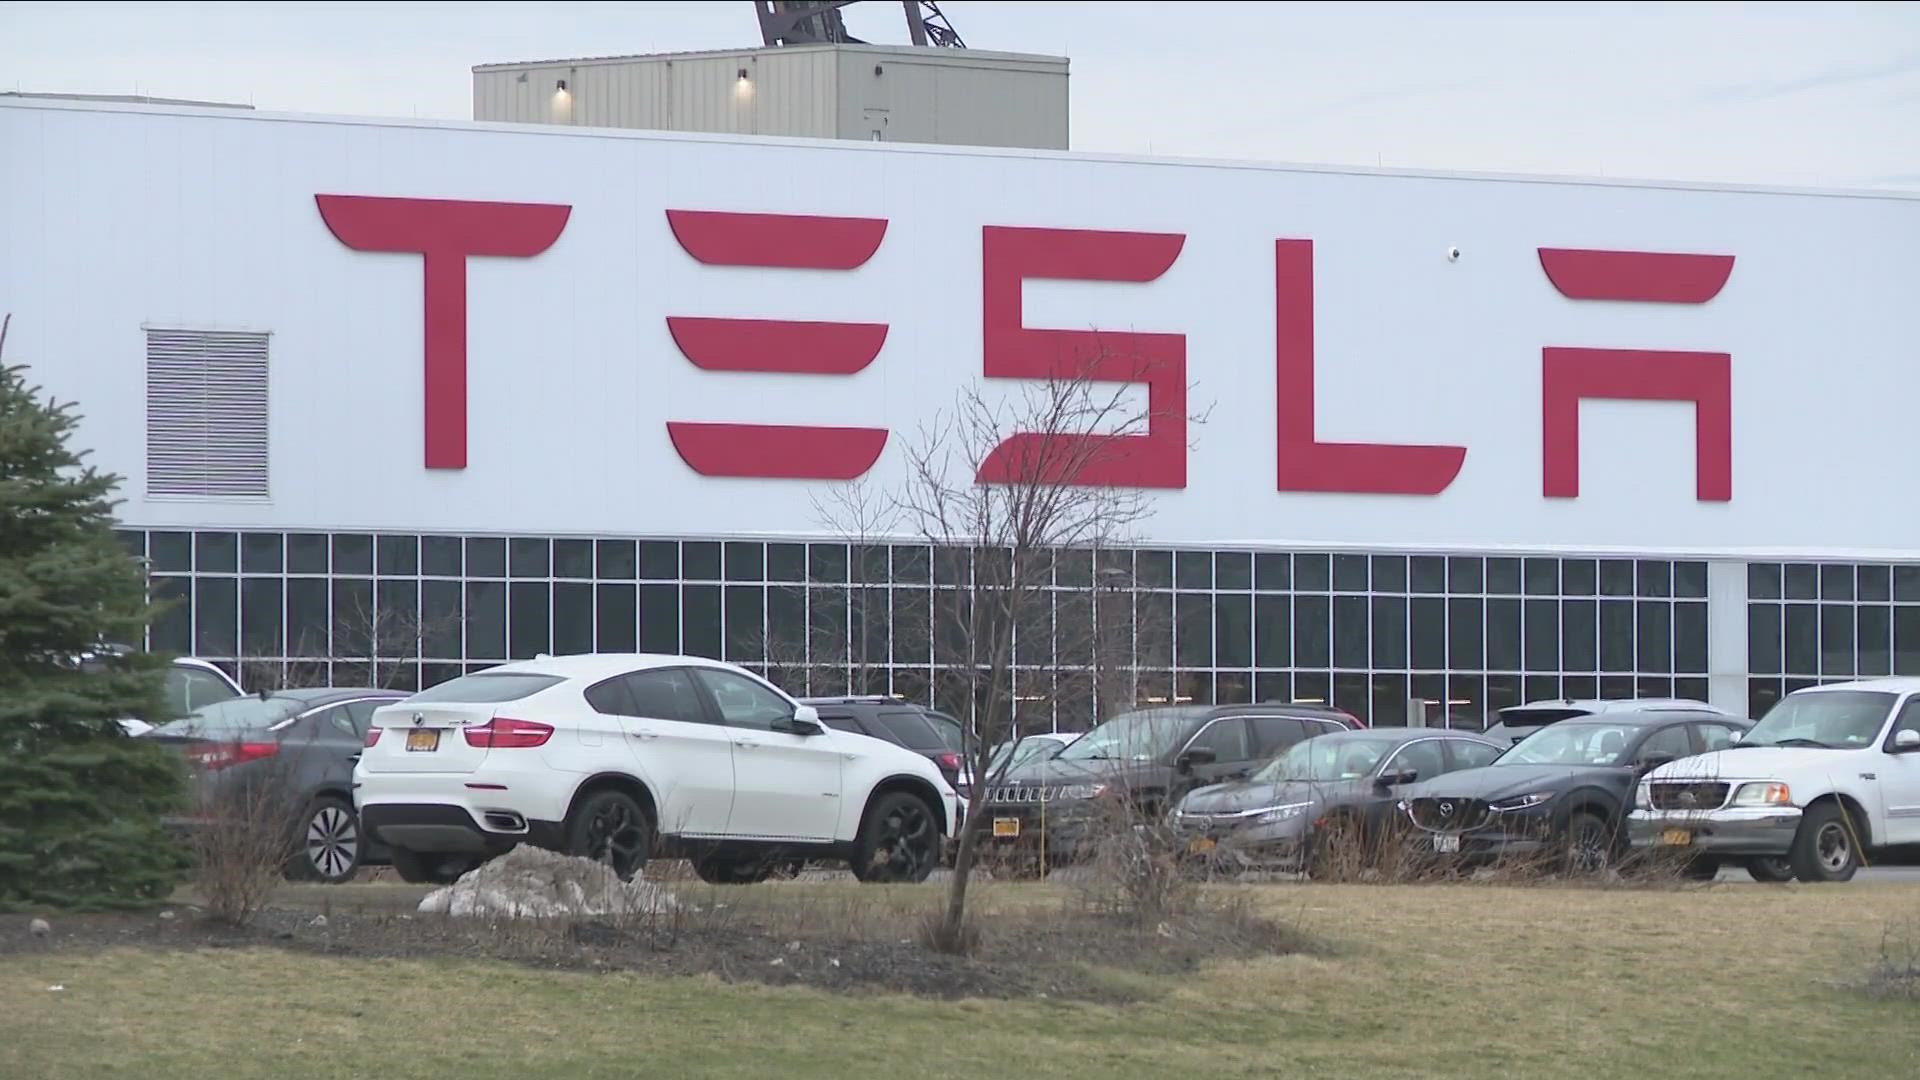 Tesla Workers United says the firings were retaliation for employees forming a union. Tesla, however, says this was part of regular performance reviews.